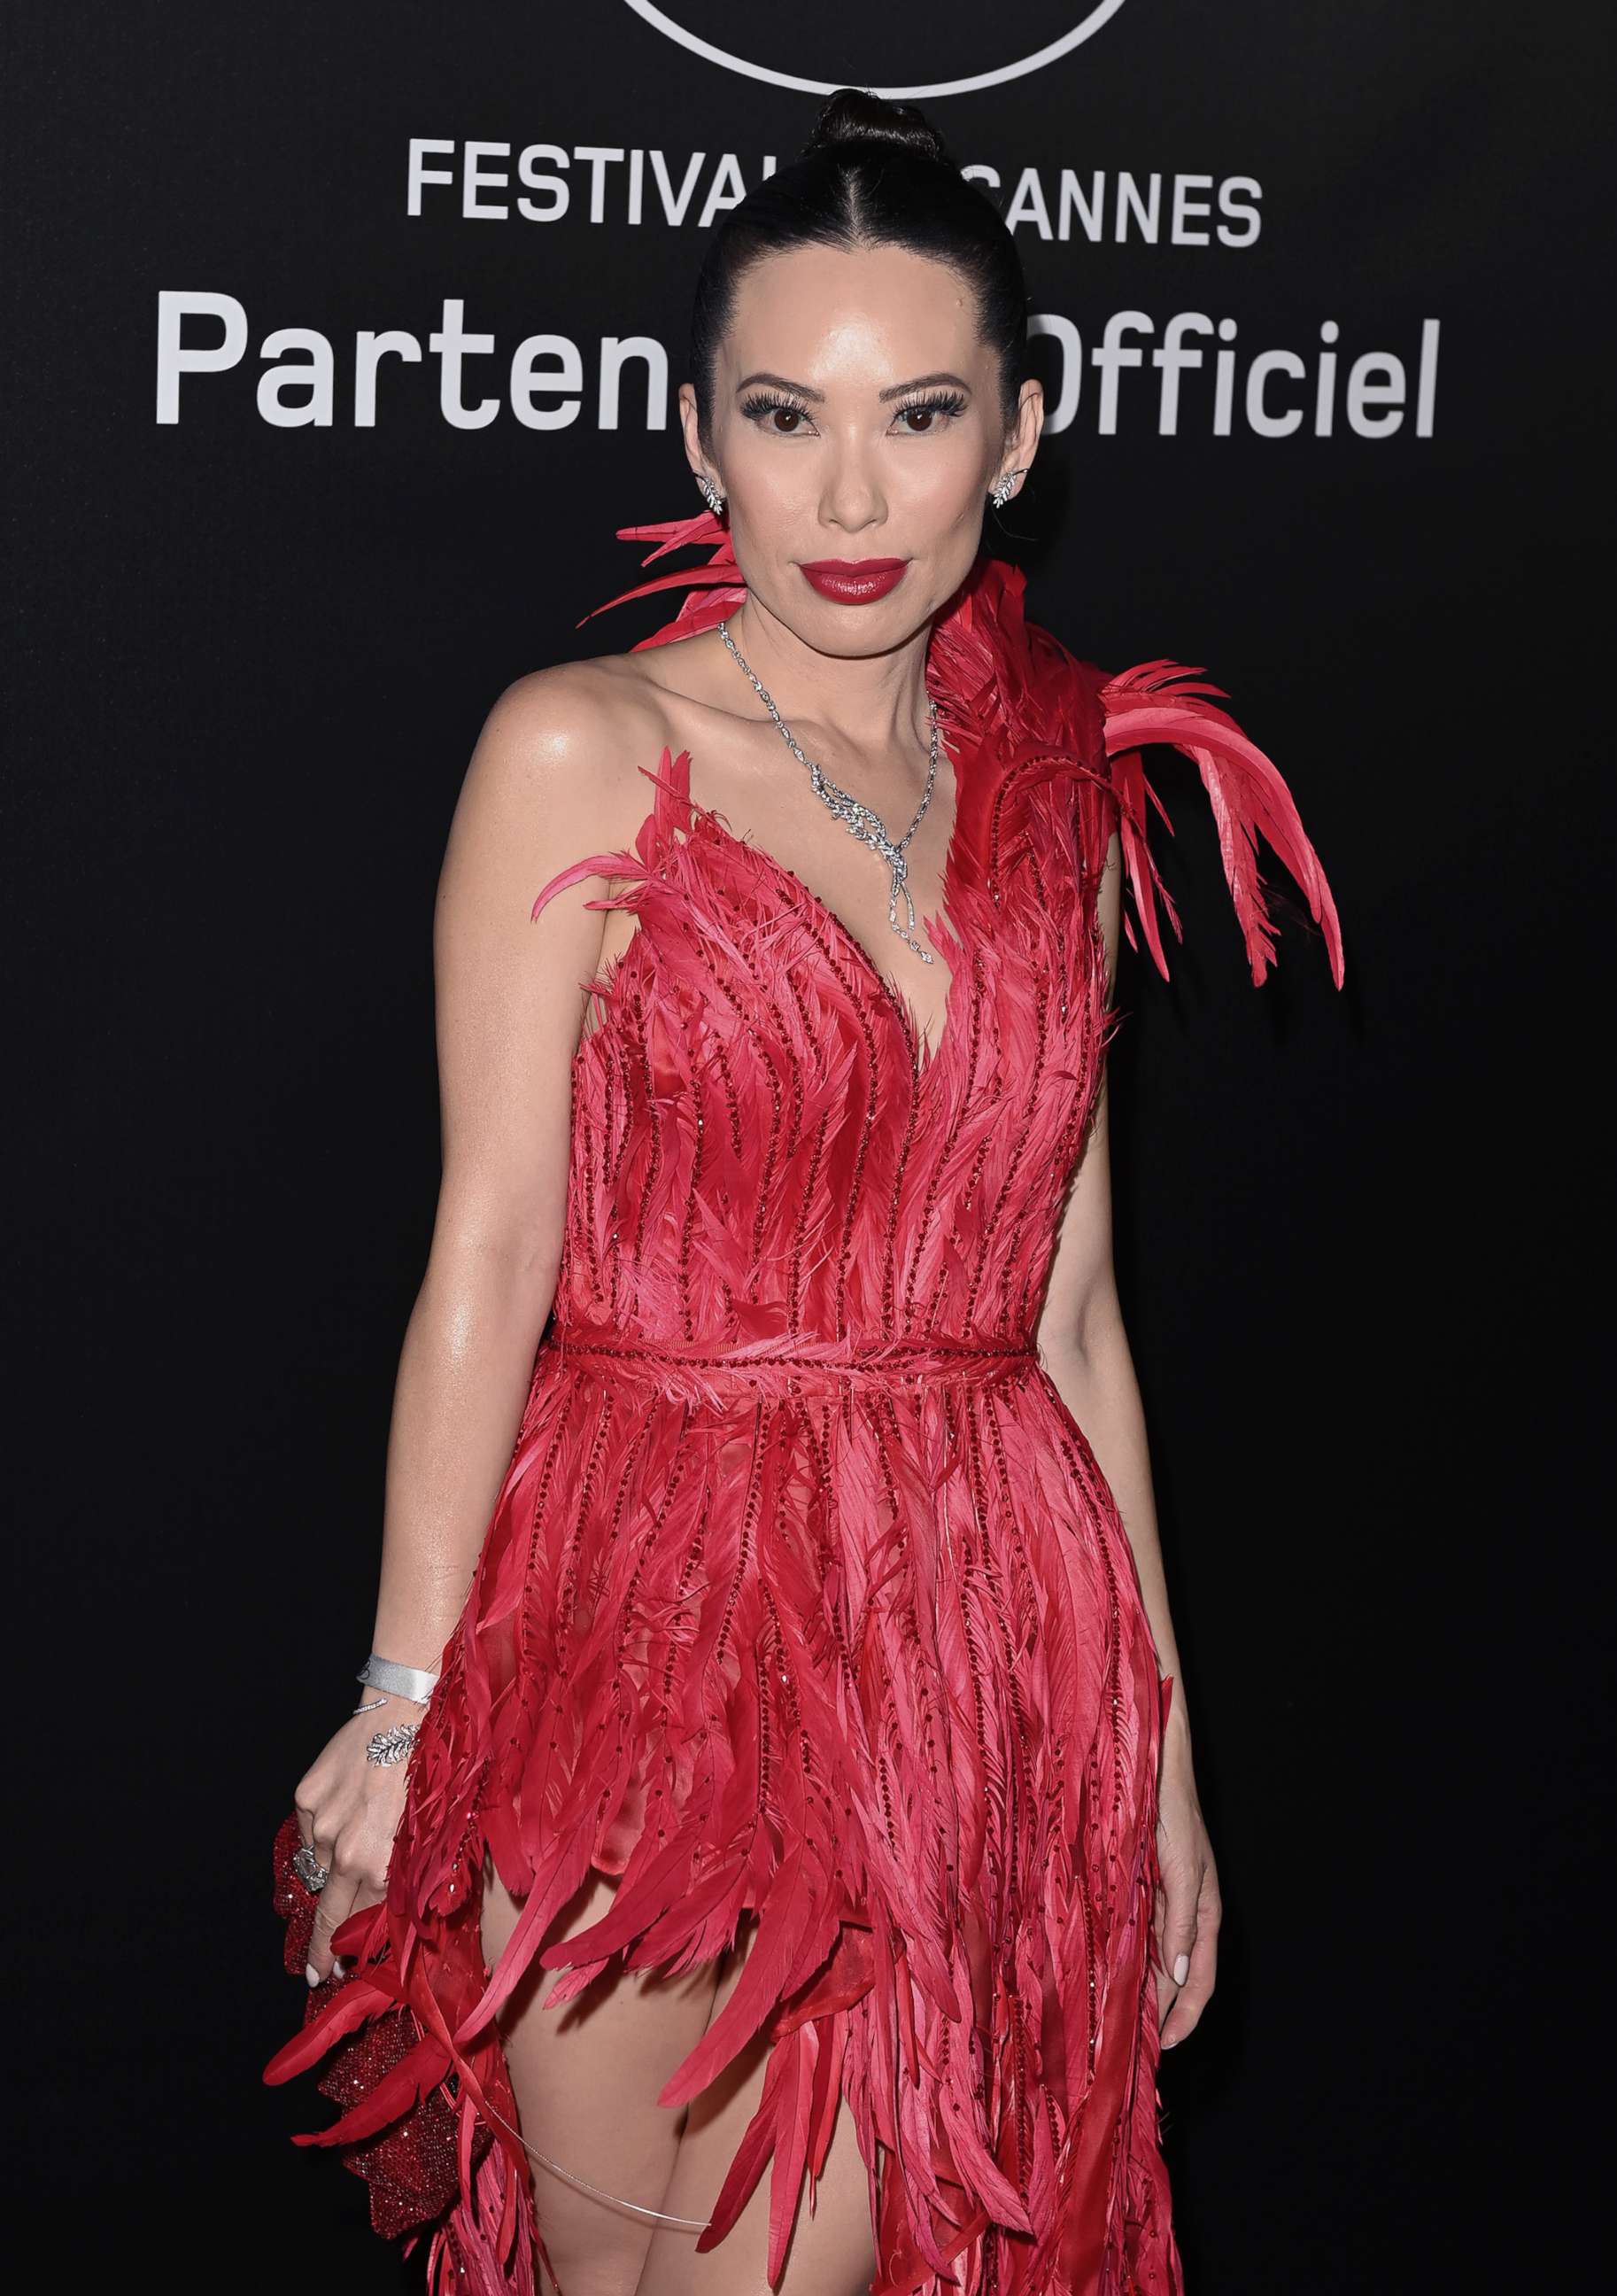 PHOTO: Christine Chiu attends an event on July 9, 2021 in Cannes, France.